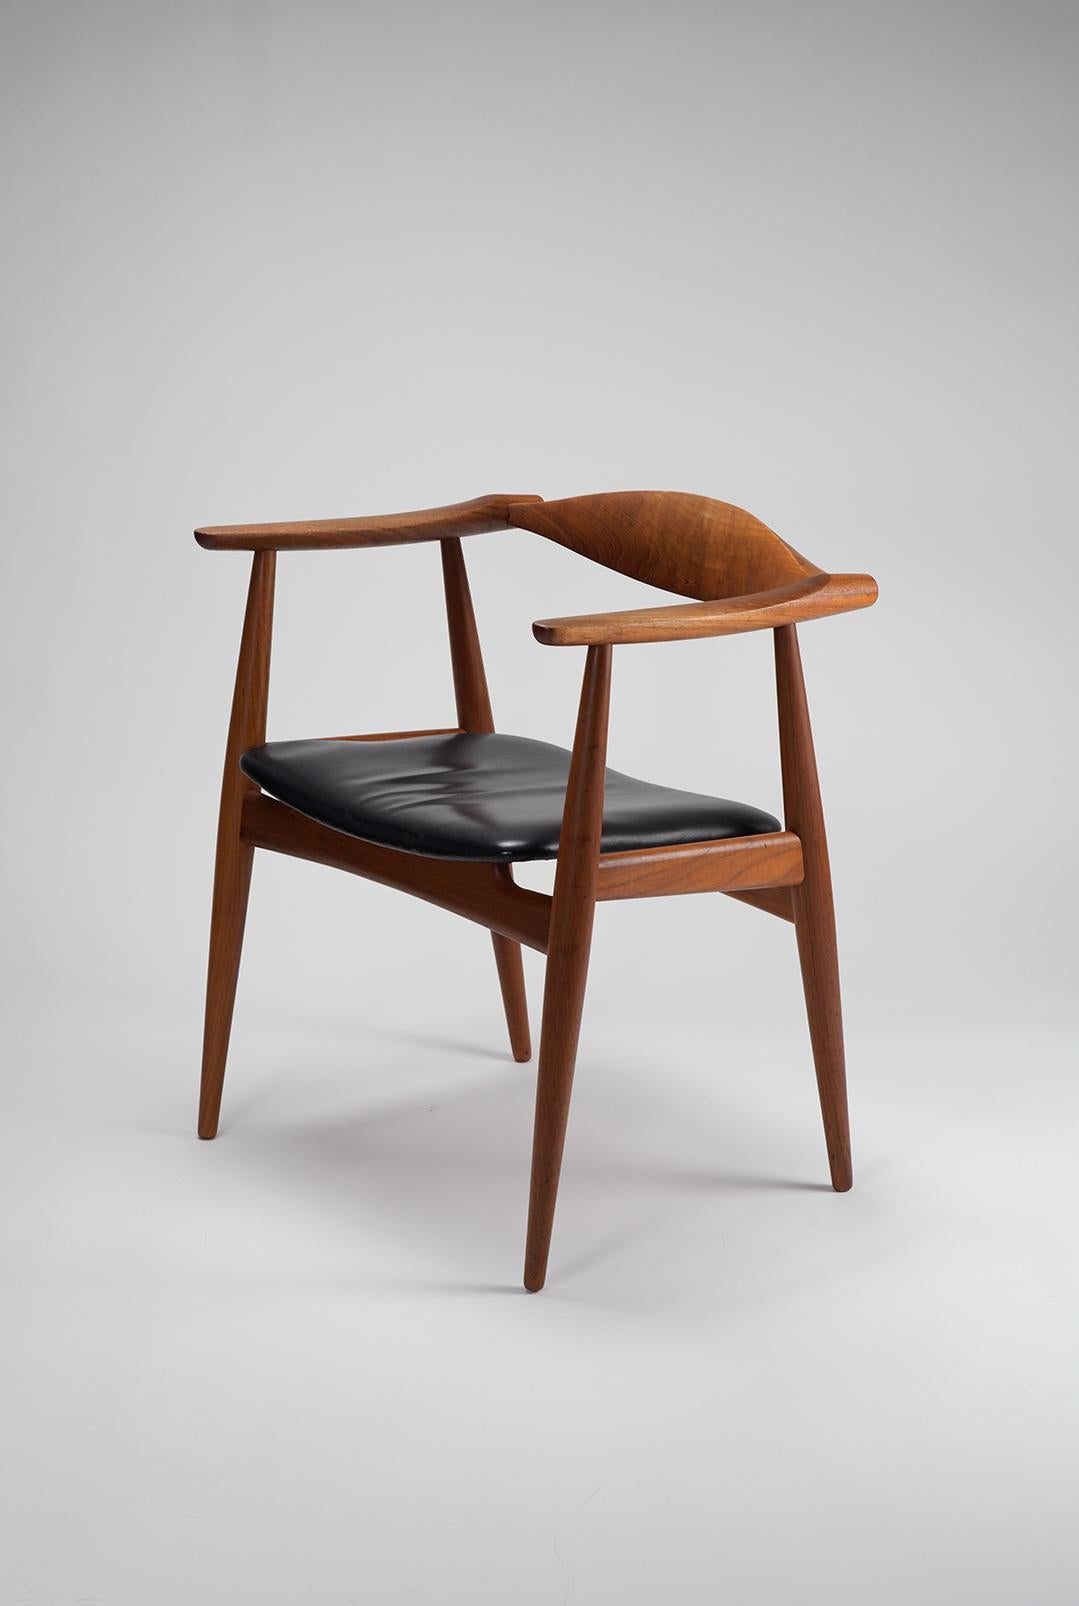 The iconic CH35 armchair in teak by Hans J. Wegner for Carl Hanson and Son. These armchairs were designed and produced in low numbers in the 1950s and are very rare to find today. This example is in great vintage condition with original black